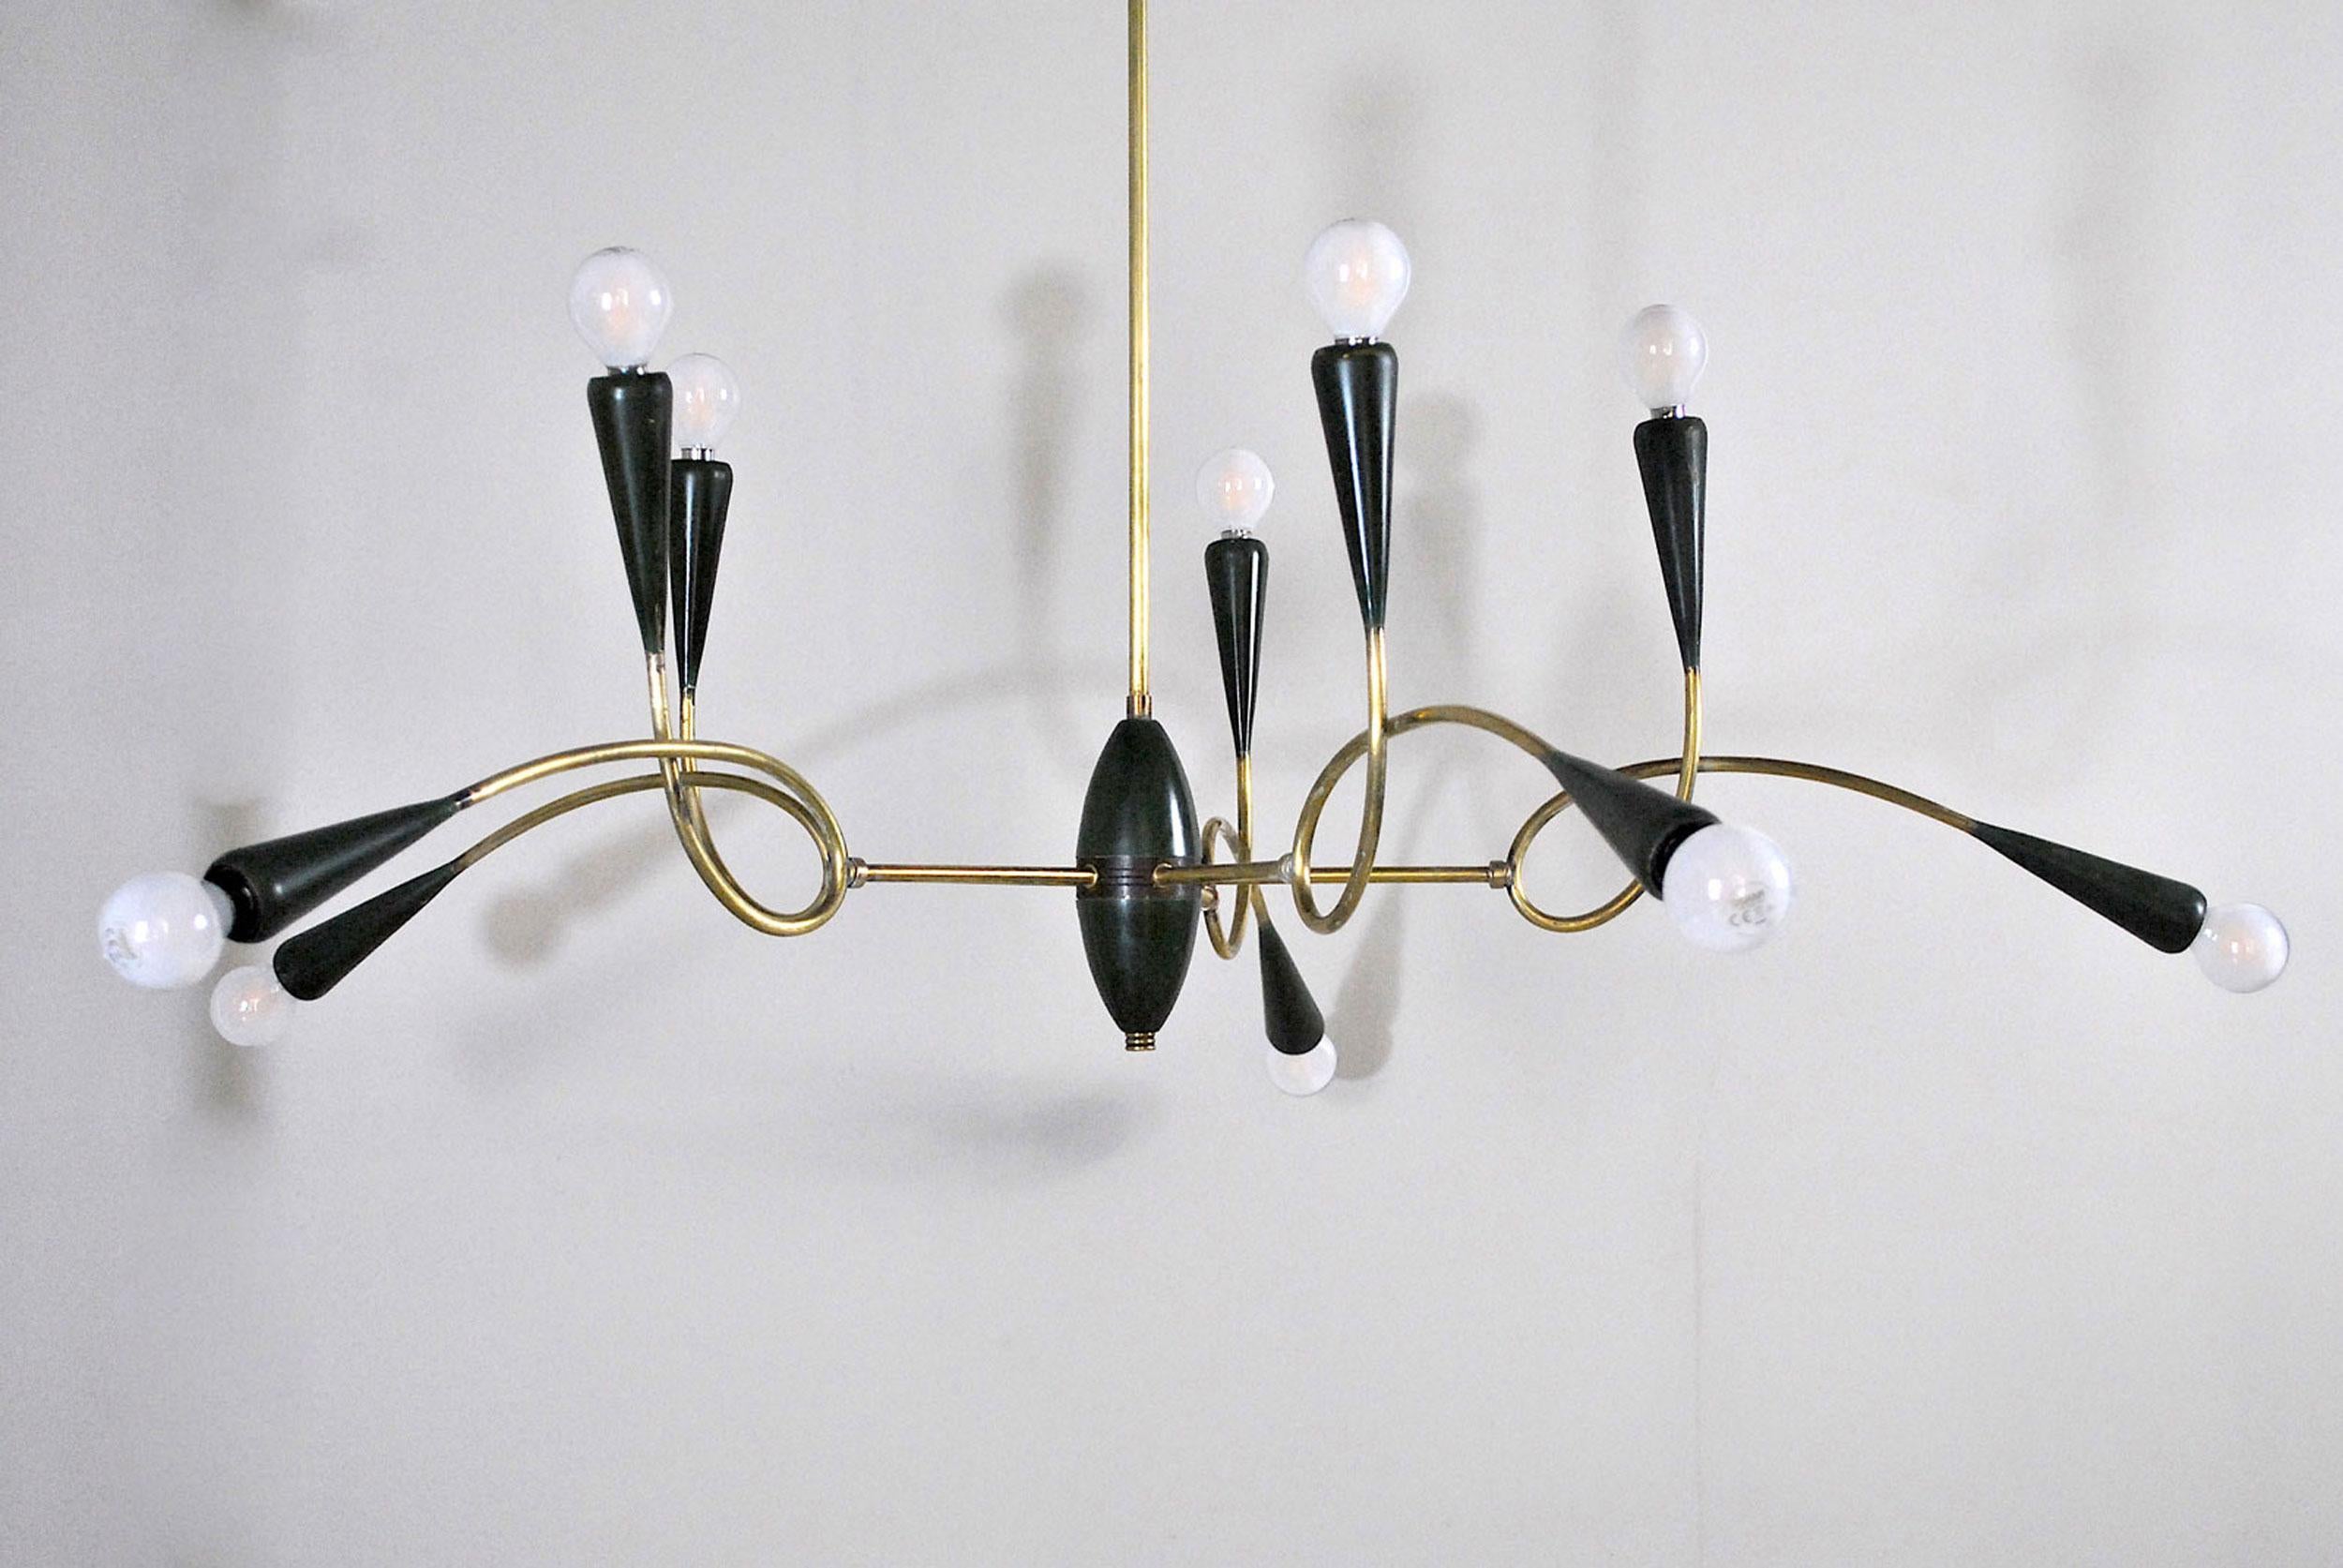 Italian Midcentury Chandelier in Brass and Aluminum from 1950s 2